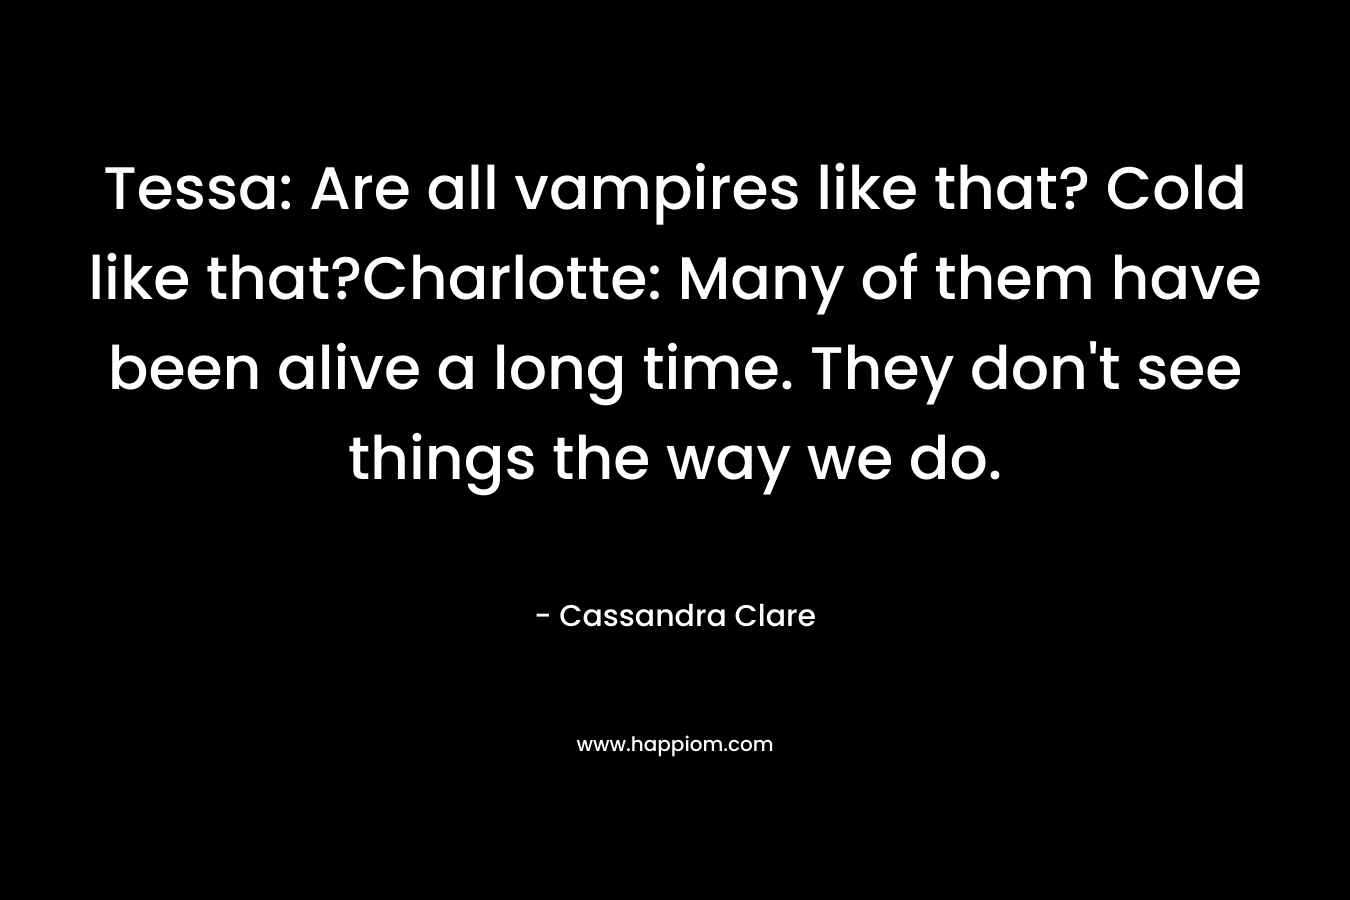 Tessa: Are all vampires like that? Cold like that?Charlotte: Many of them have been alive a long time. They don’t see things the way we do. – Cassandra Clare